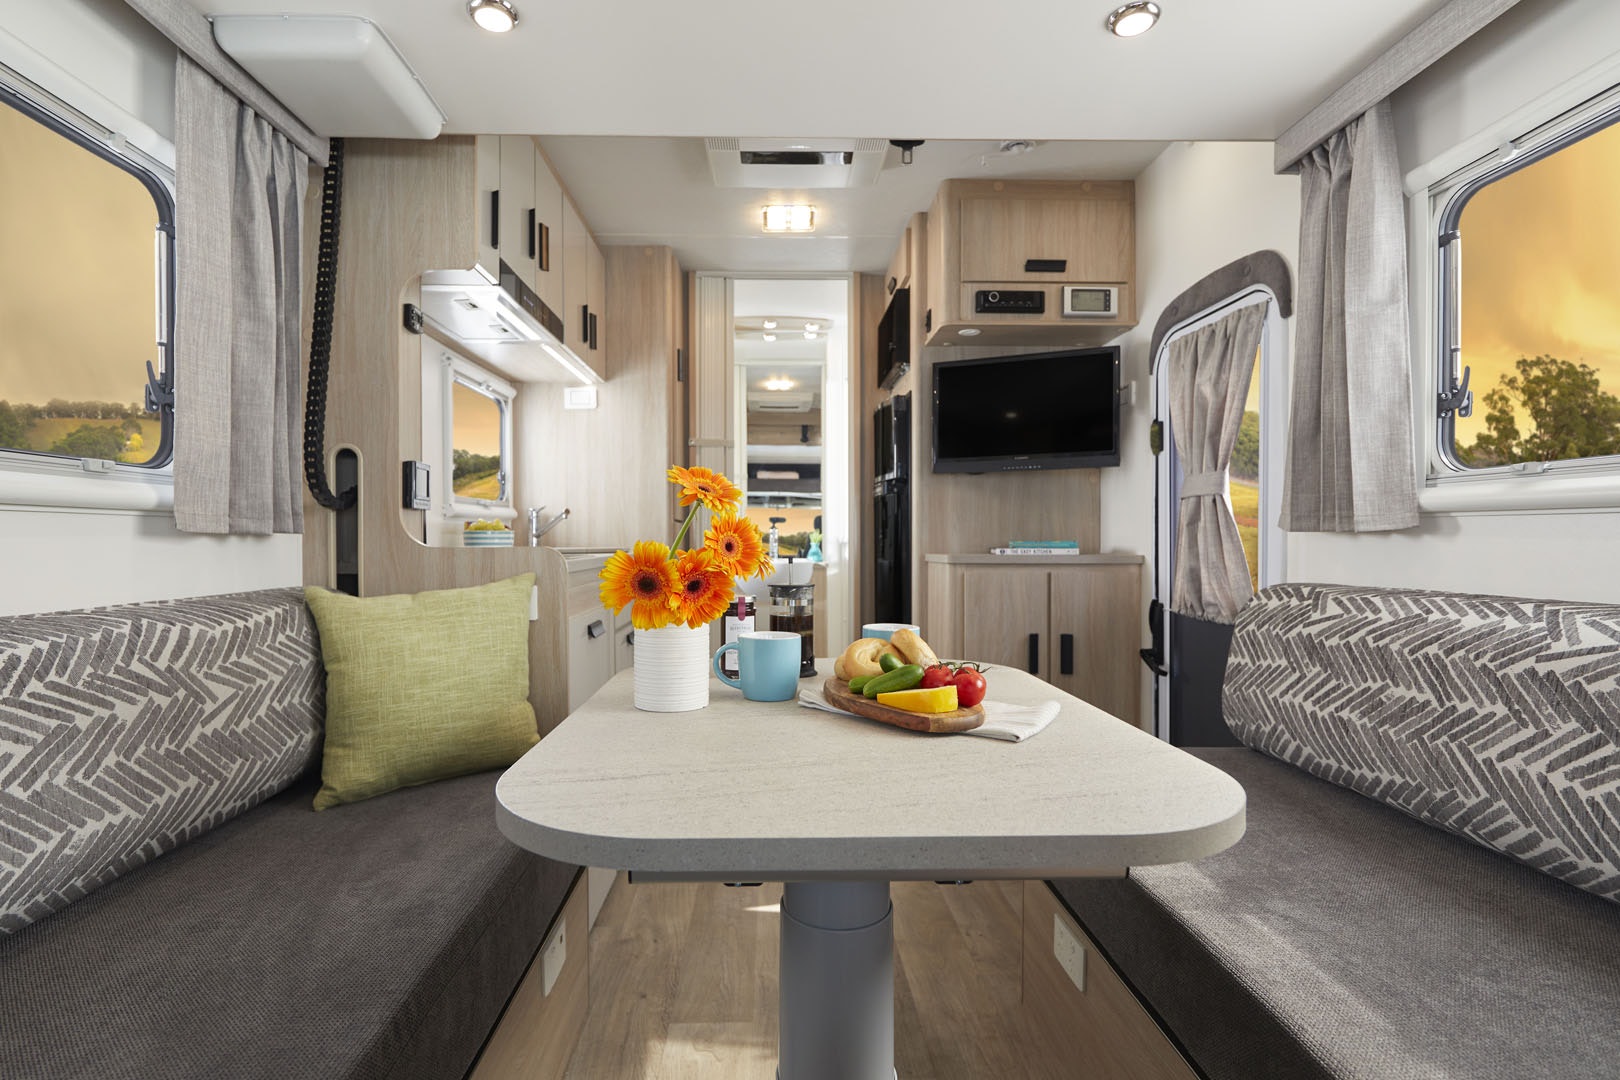 jayco rv dinette replacement